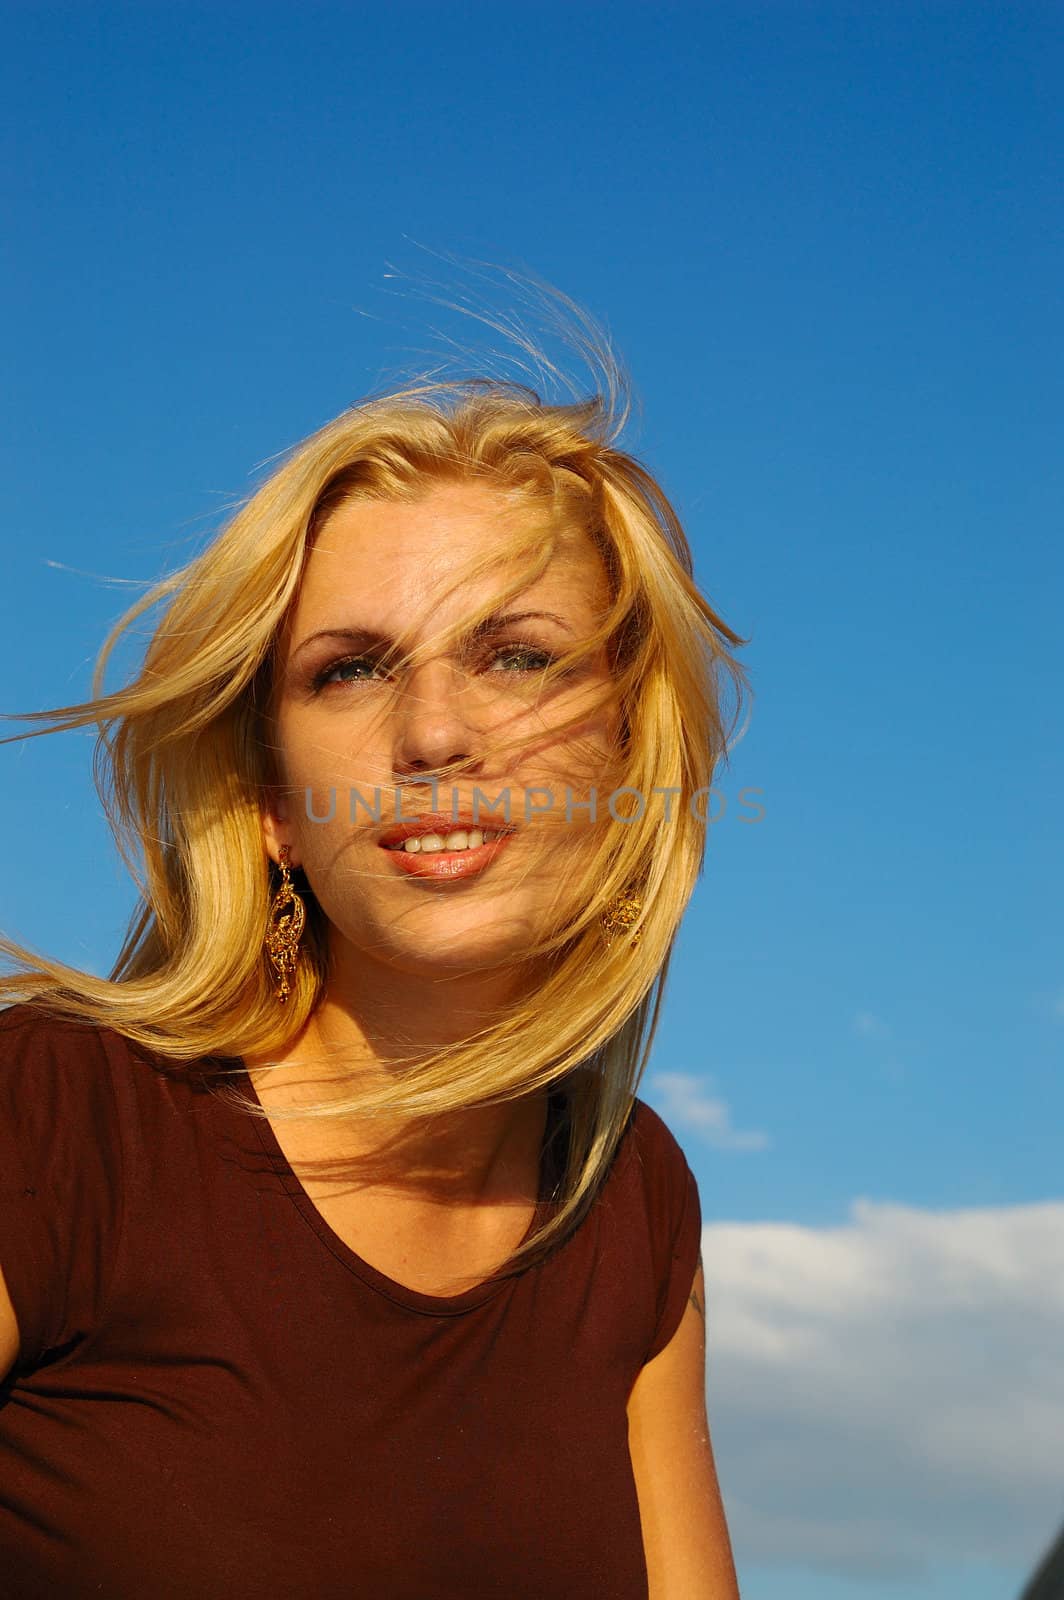 blond woman with fly-away hair against blue sky